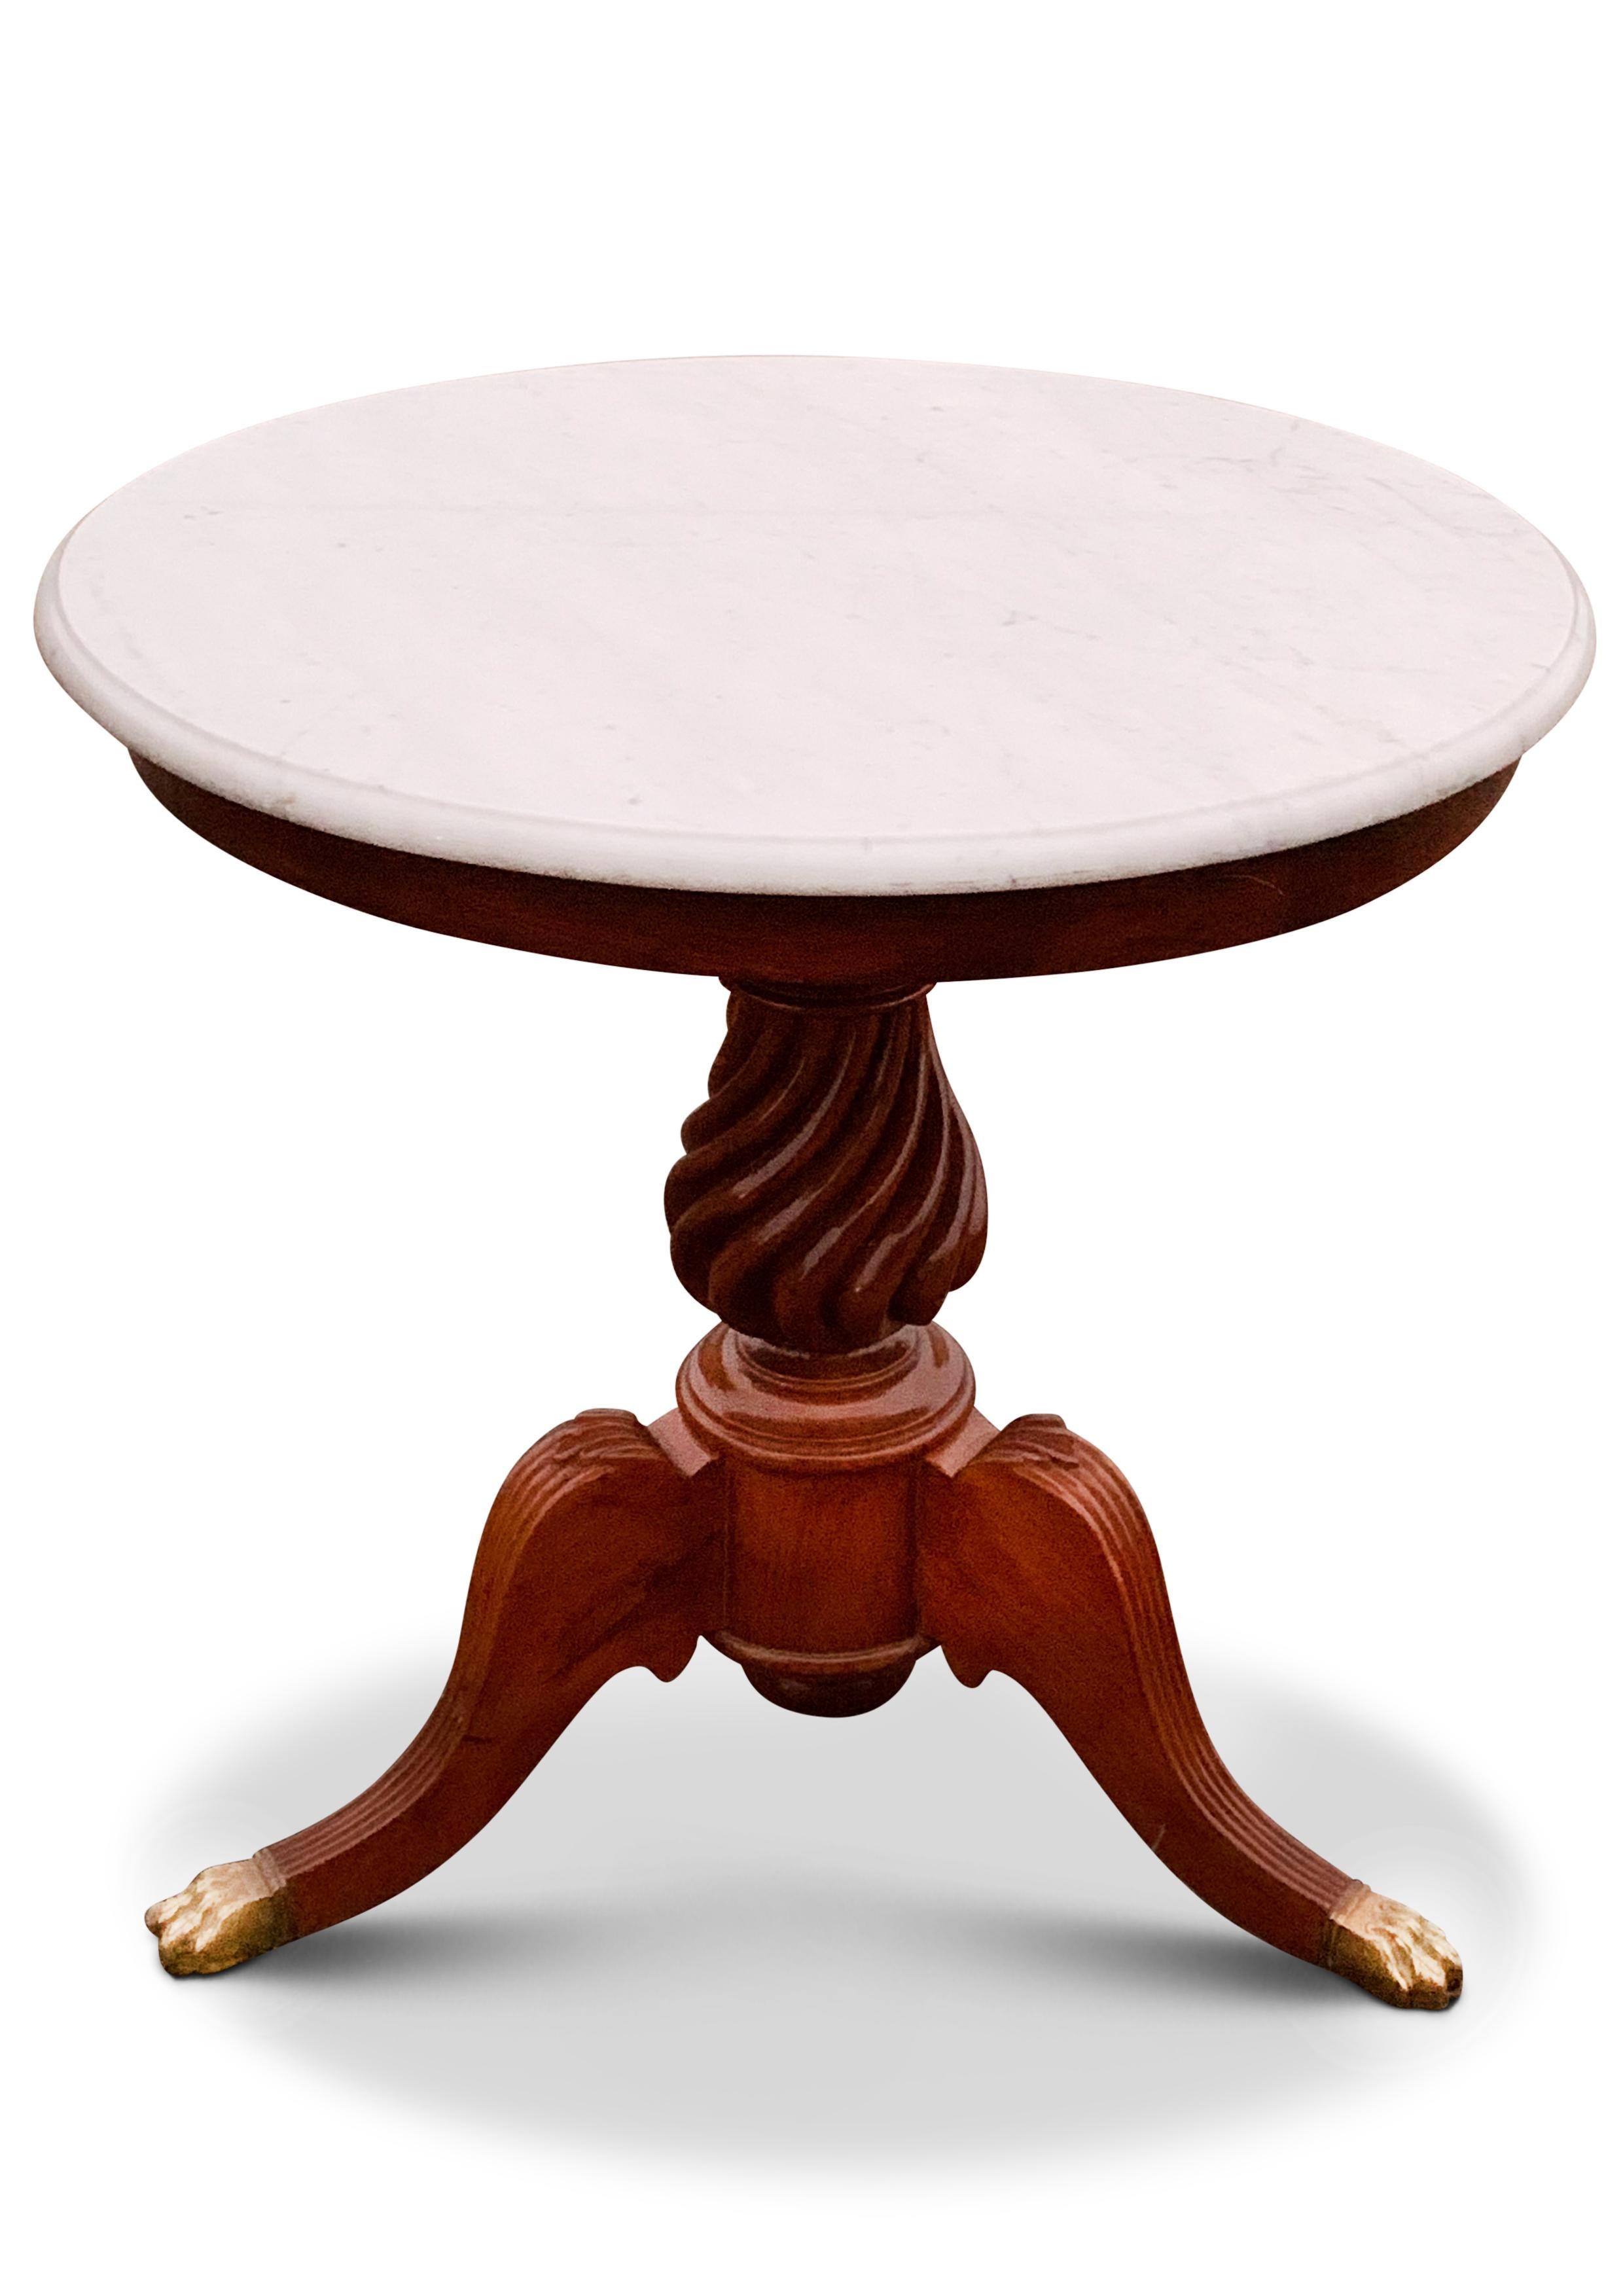 19th Century Marble & Mahogany Gueridon Pedestal Table With Turned Wood Column Over a Tripod Base Terminating With Brass Paw Feet.

Would make for an excellent hallway centre table, or living area corner table to host an exquisite lamp. 

